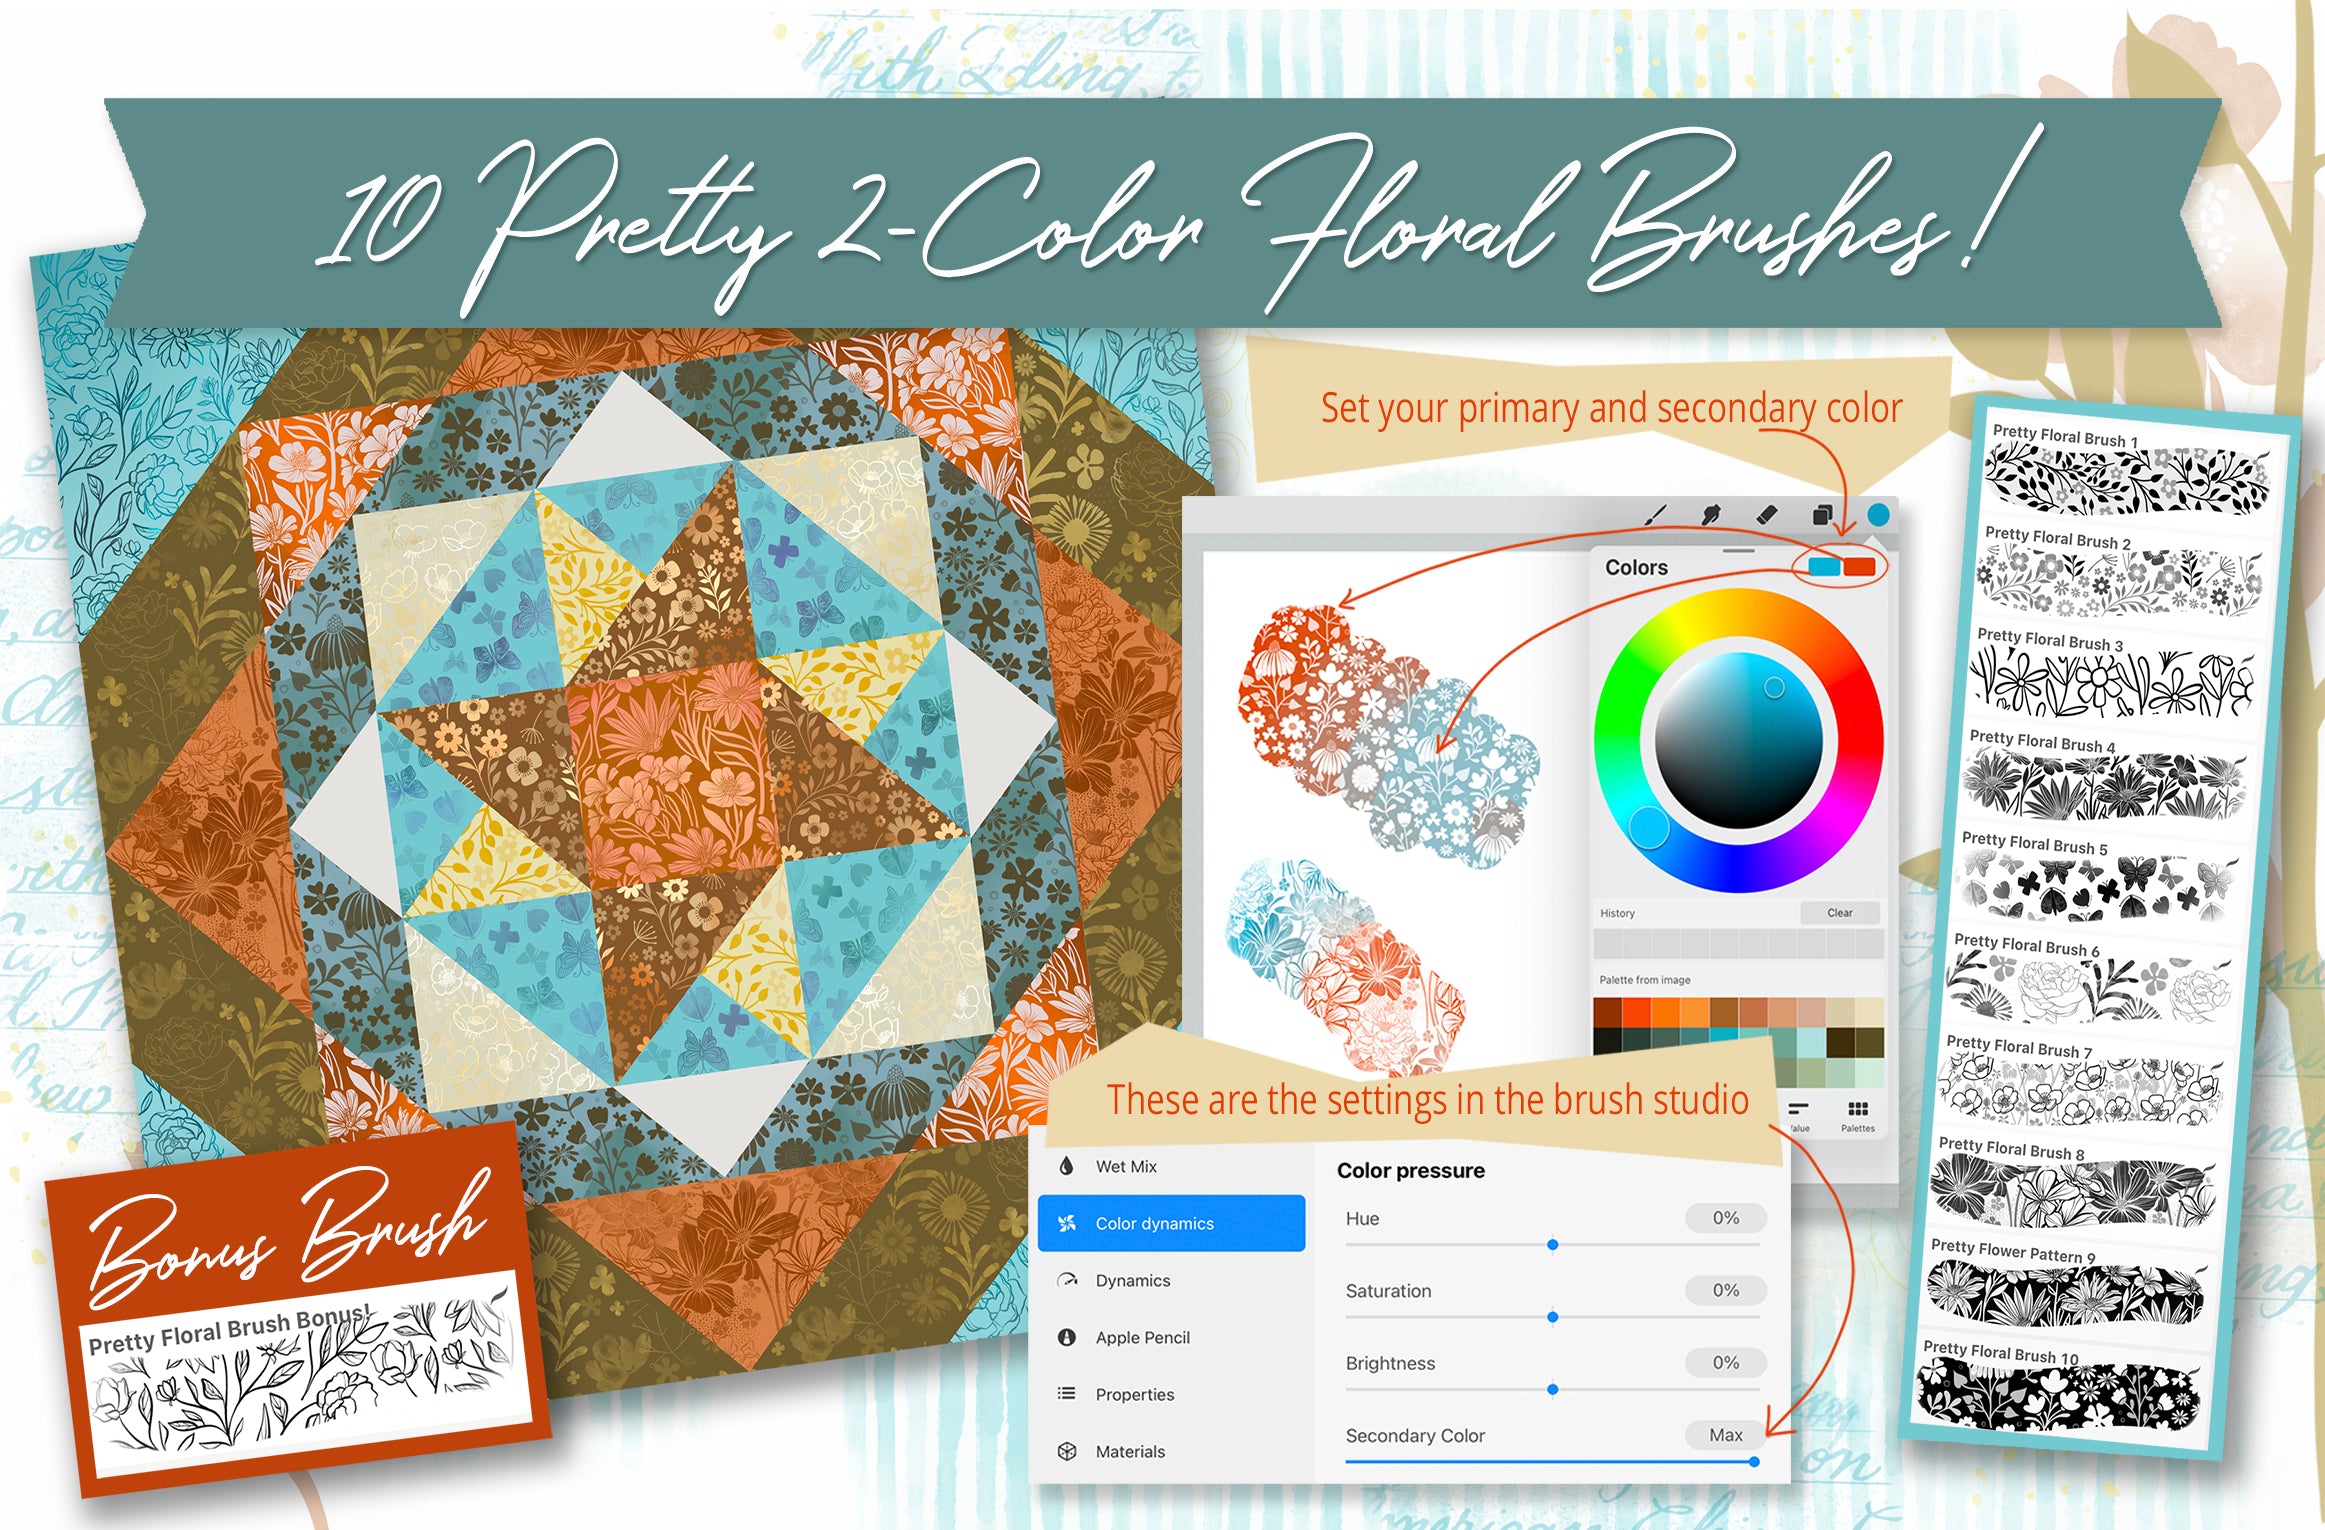 Volume 125 - Procreate Pretty 2-Color Floral Brushes and Quilt Asset Pack